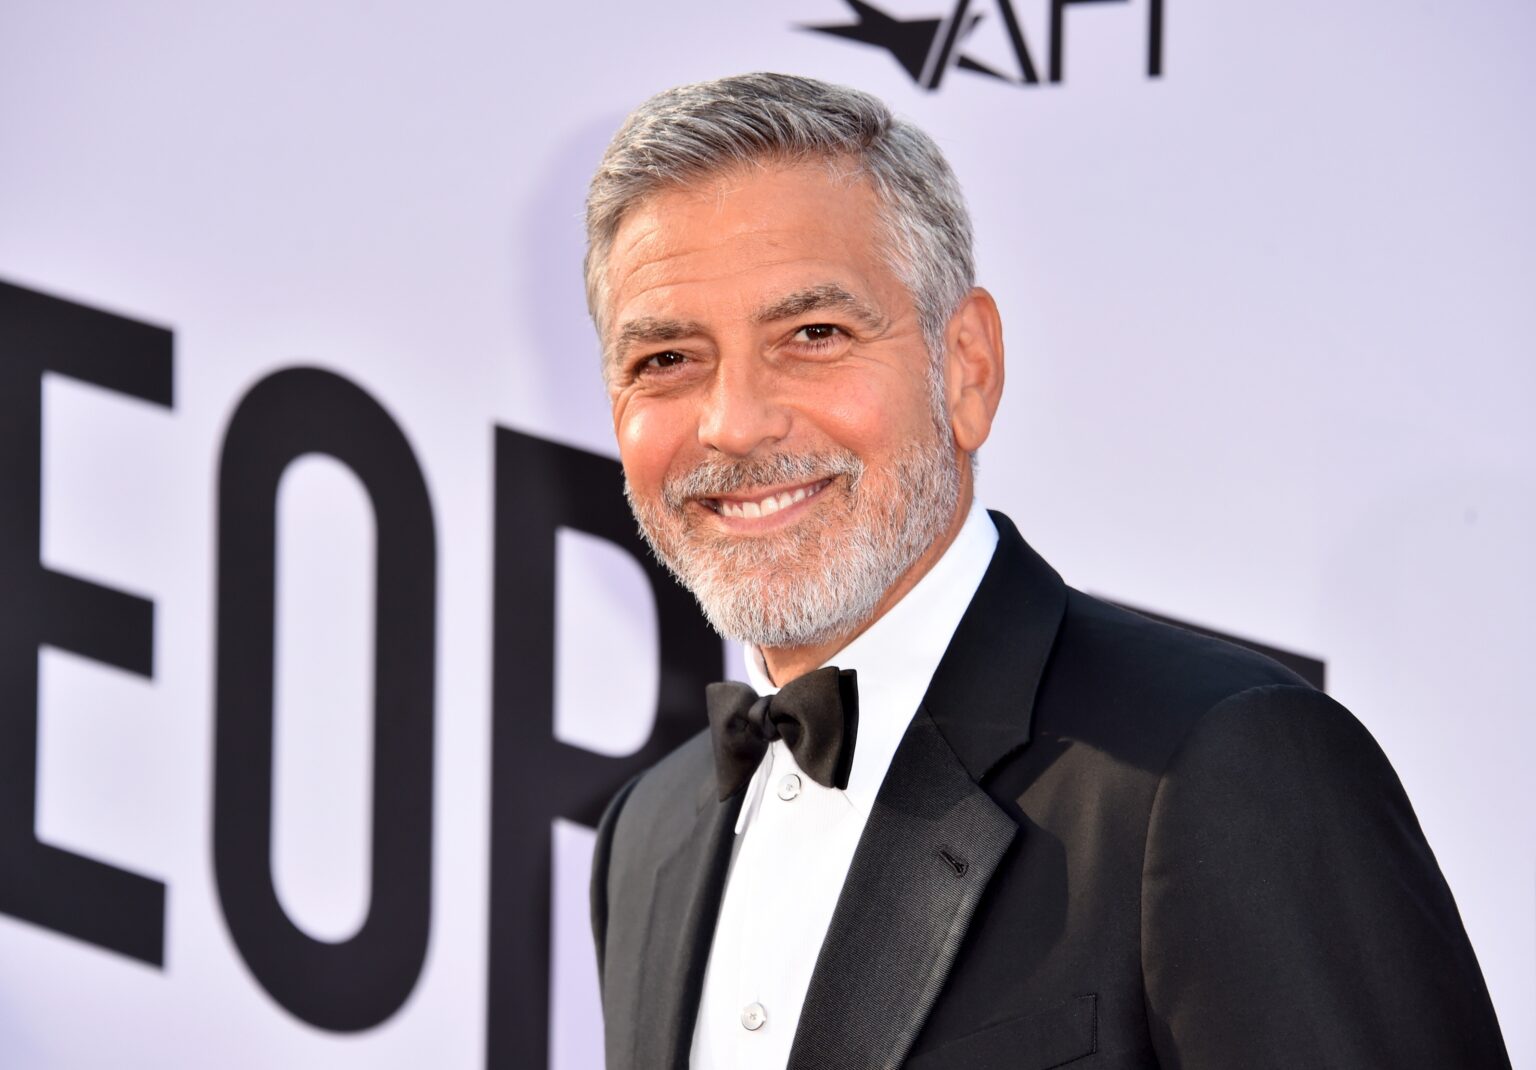 George Clooney has been in the film industry for many years, so there are bound to be some weird ones in his filmography; we went looking for them.